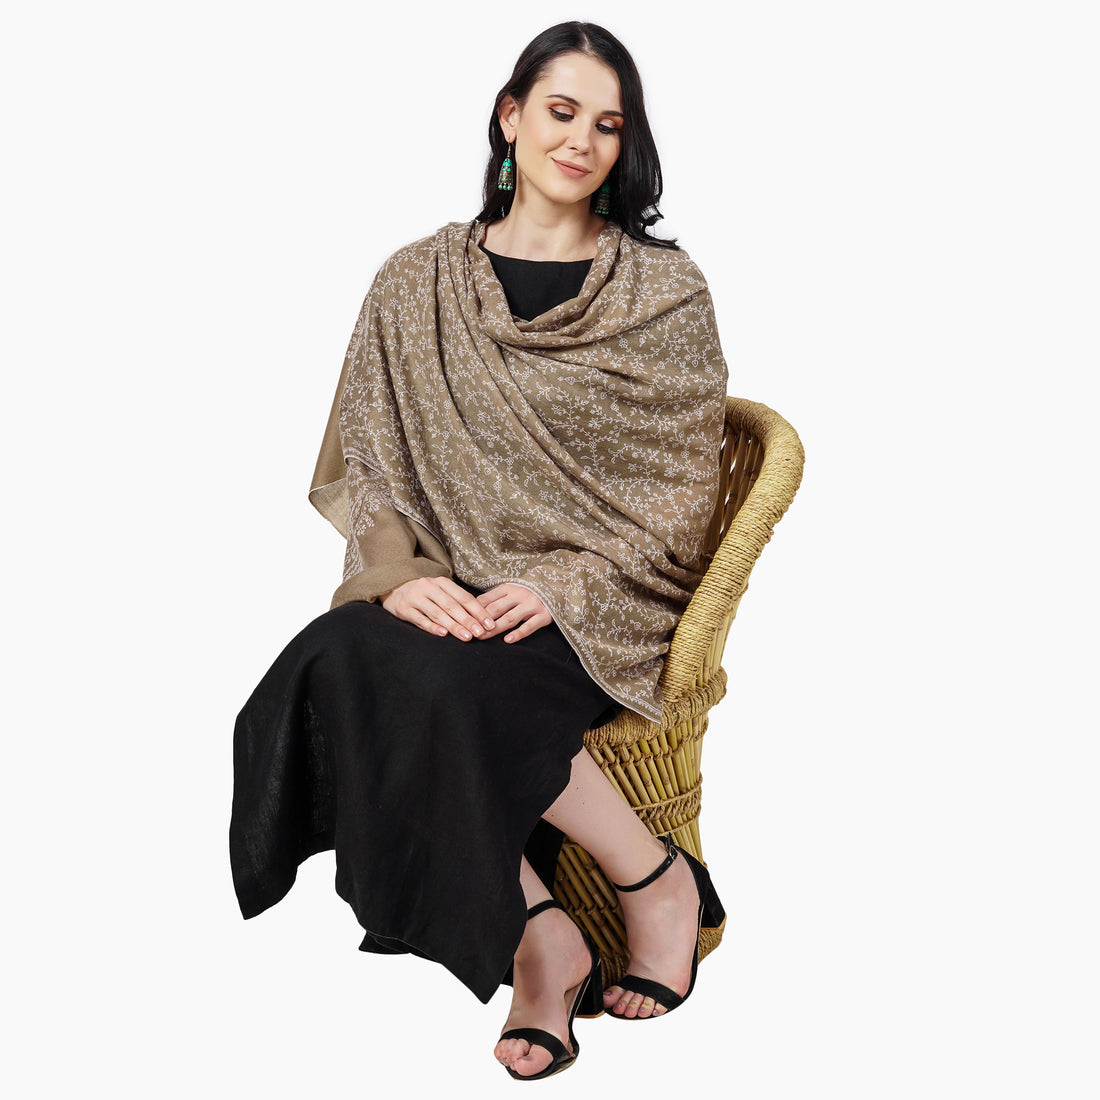 A model wearing toosh color pashmina shawl with white sozni embroidery